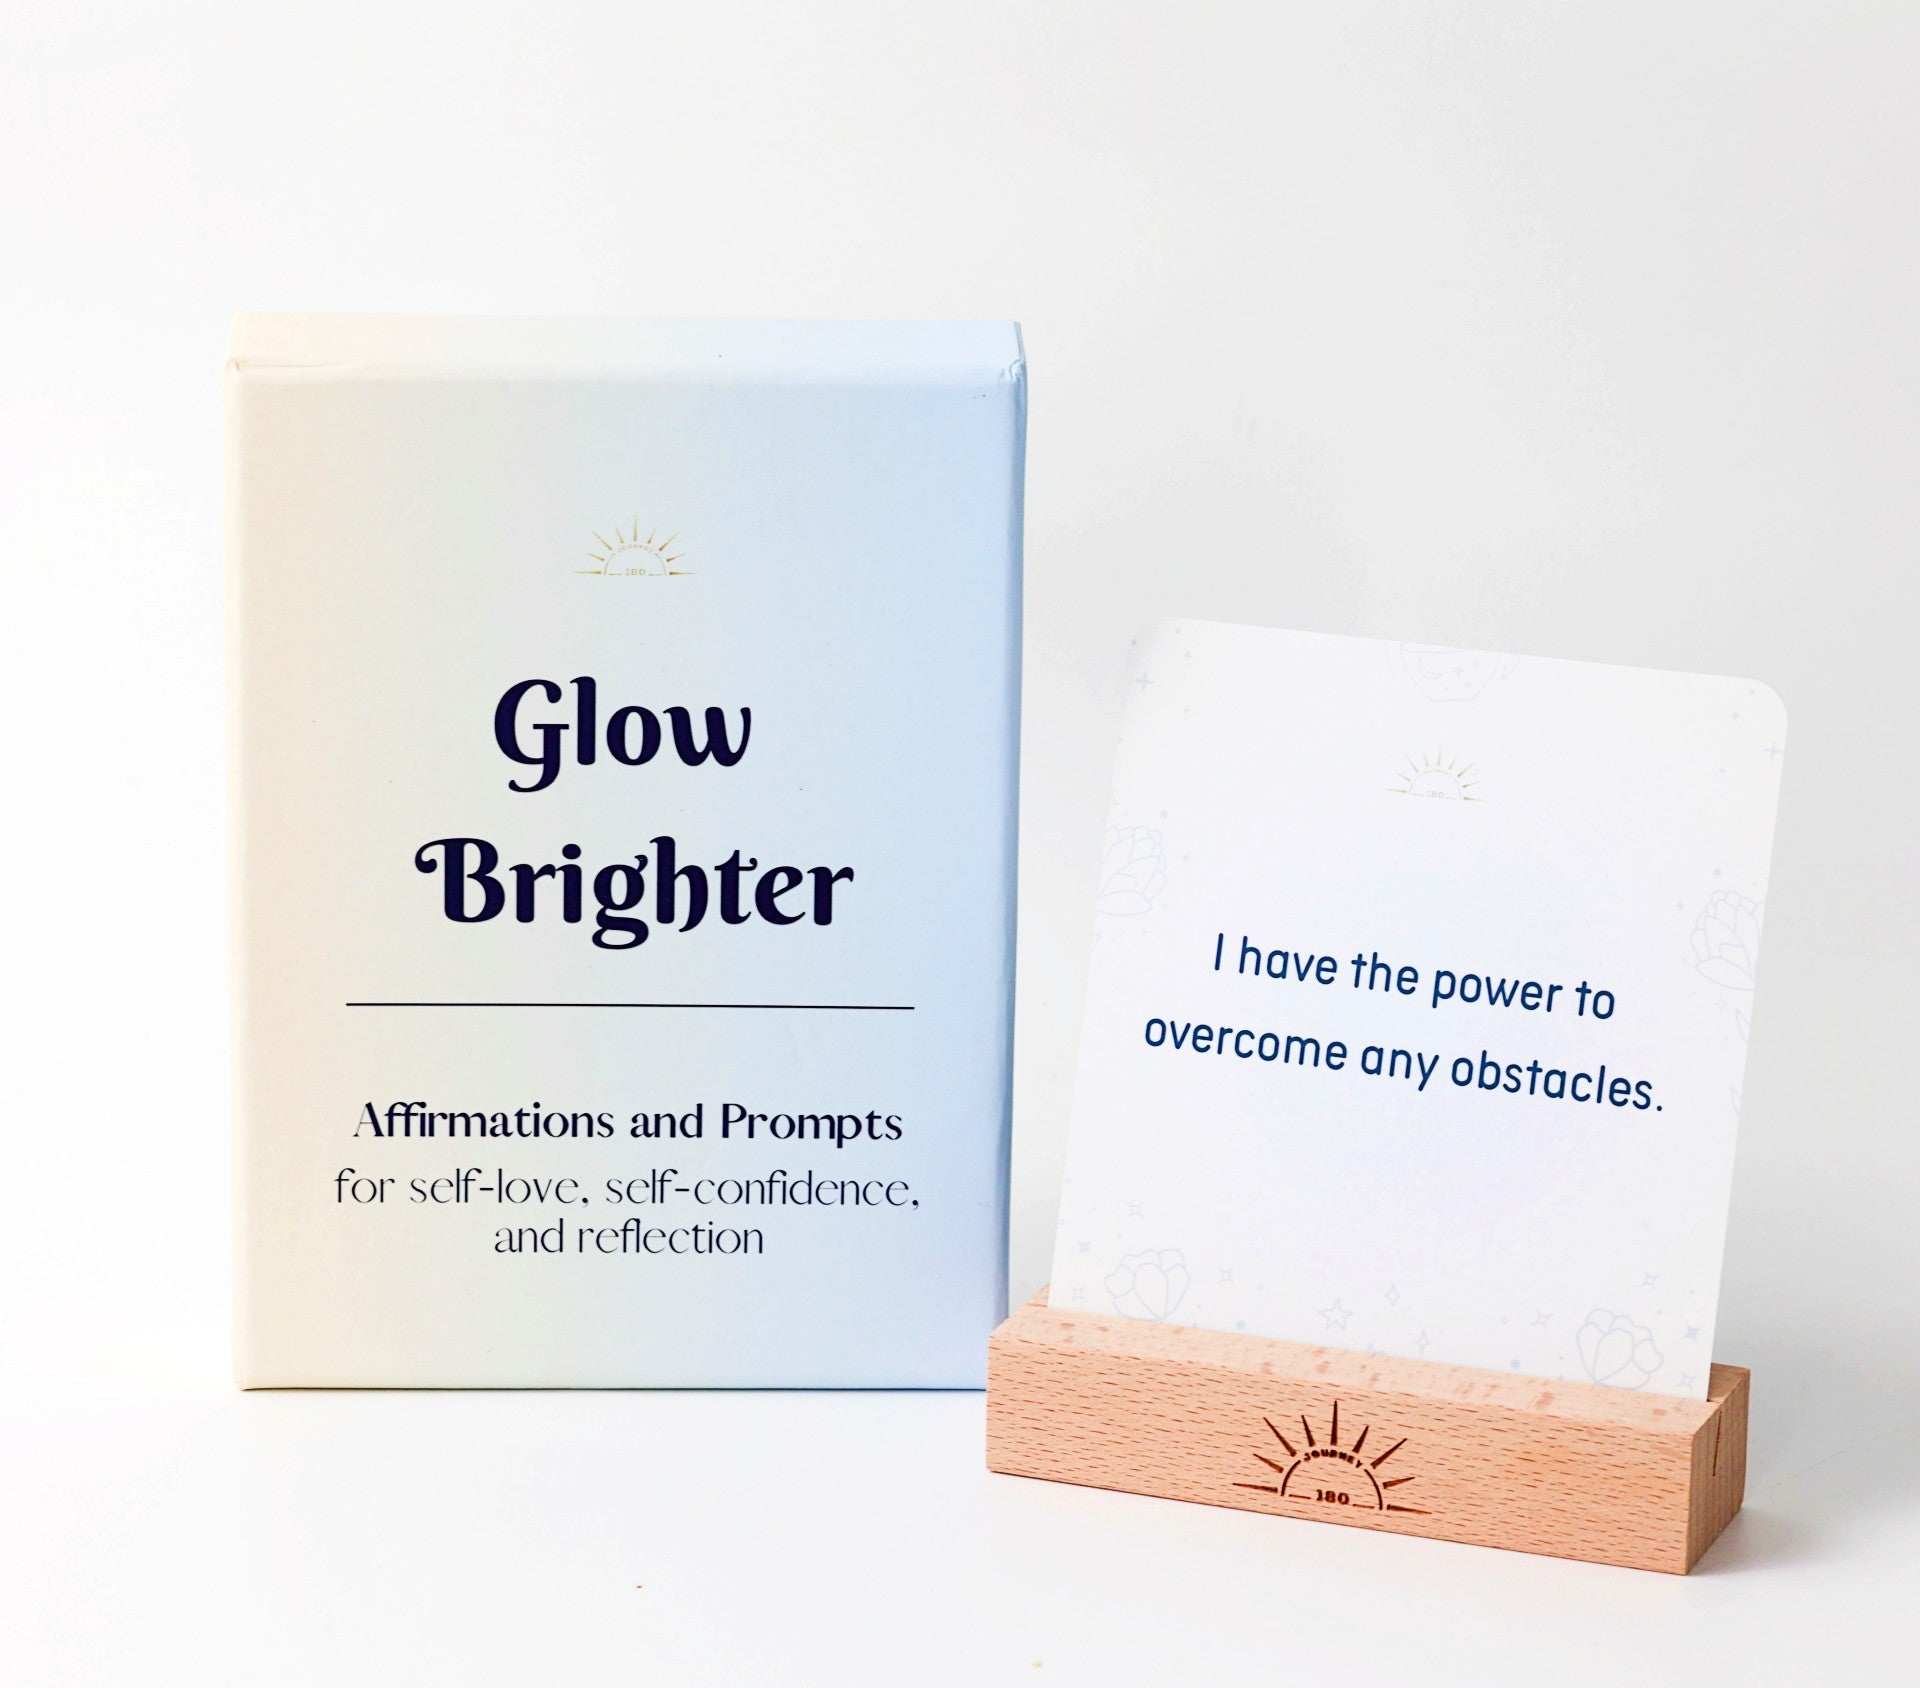 Glow Brighter 52 Positive Affirmation Cards and Reflective Journaling Prompts for Self-Love, Self-Confidence, and Mindfulness with Stand